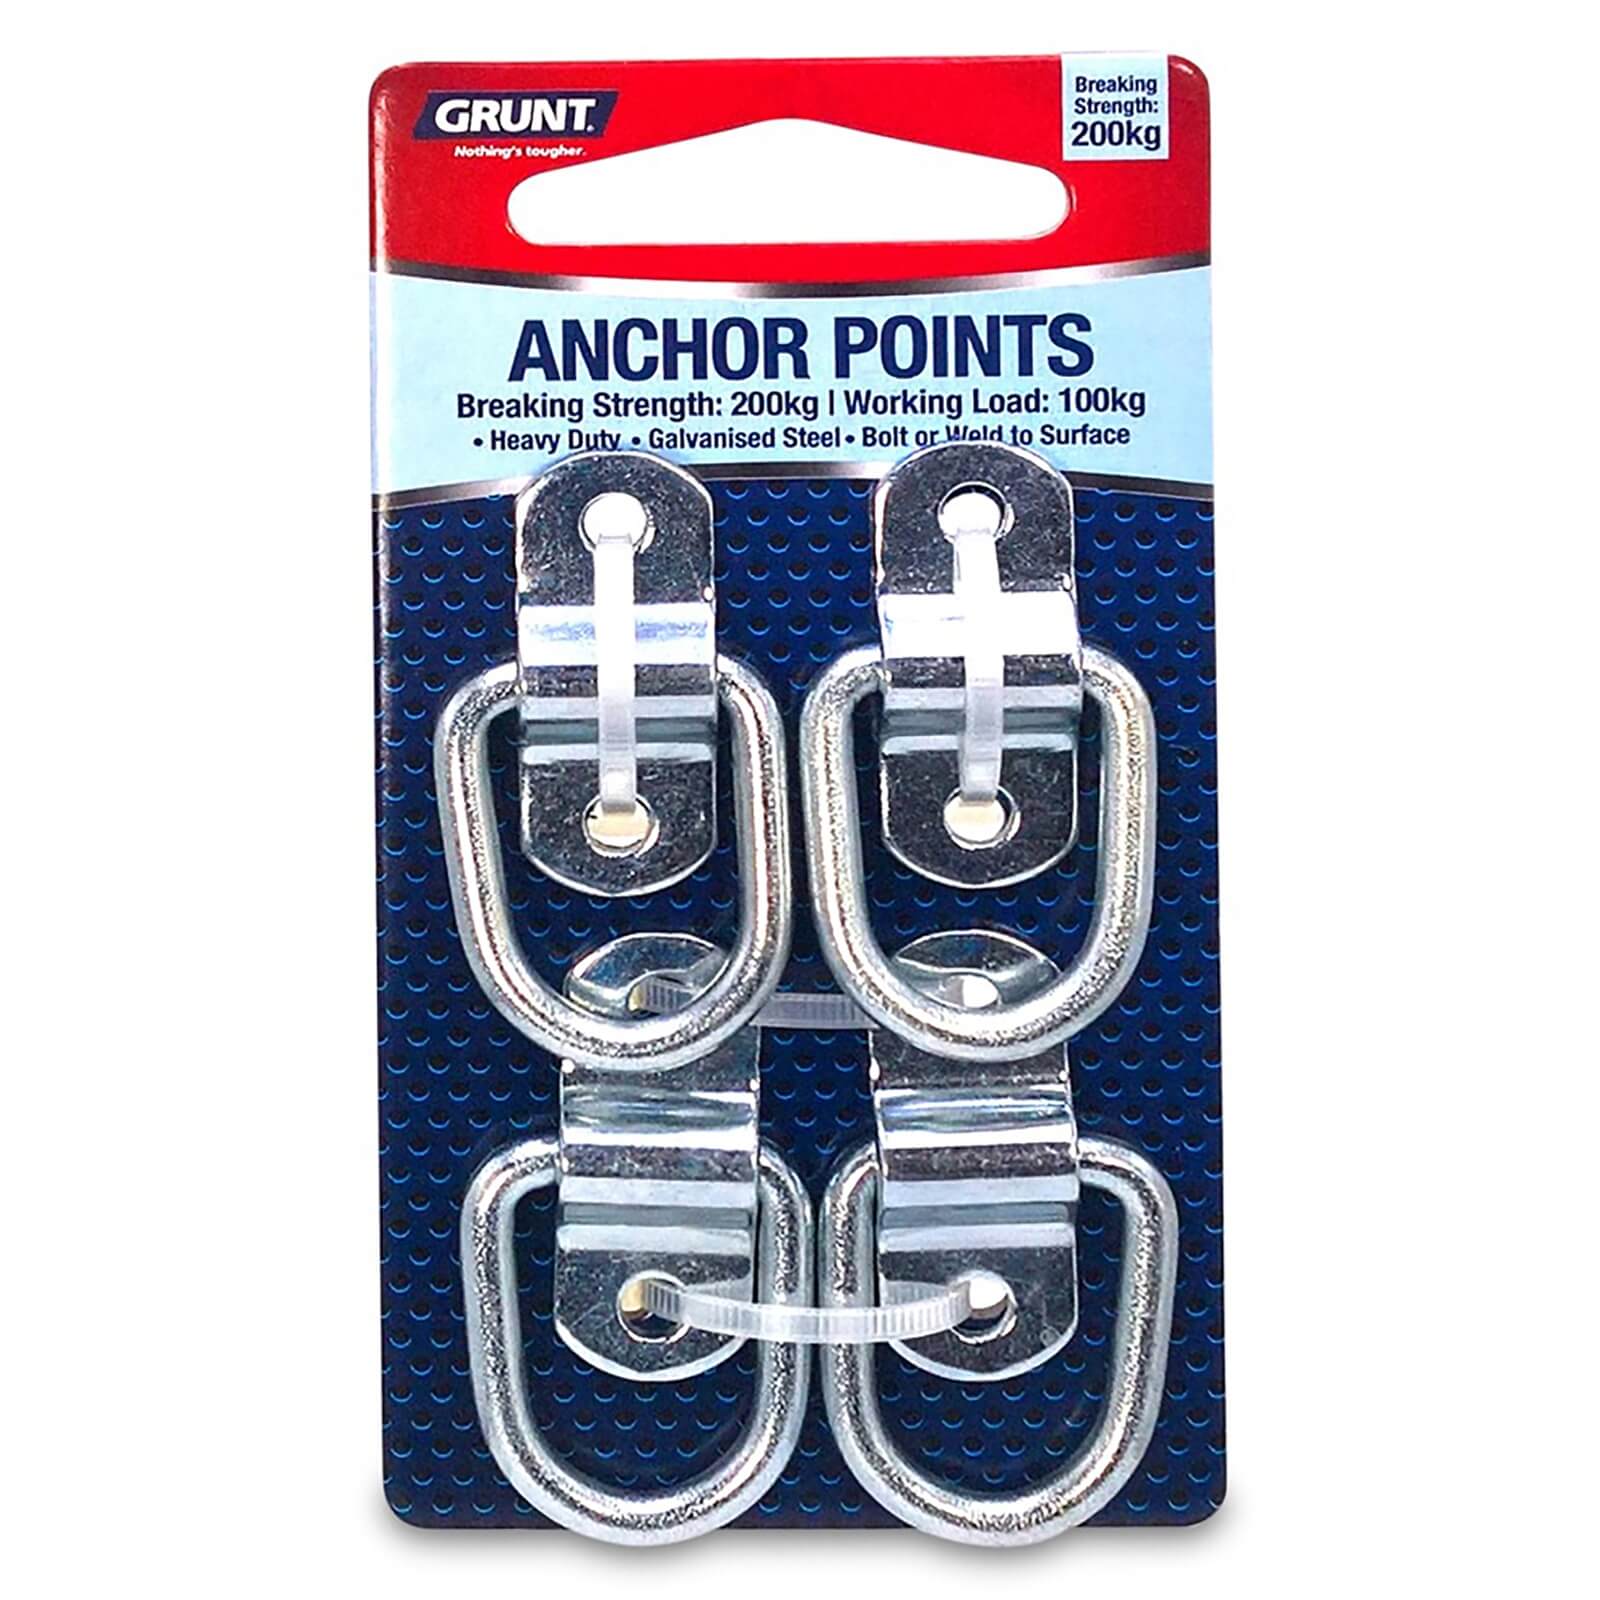 Grunt Anchor Points Bracket - Pack of 4